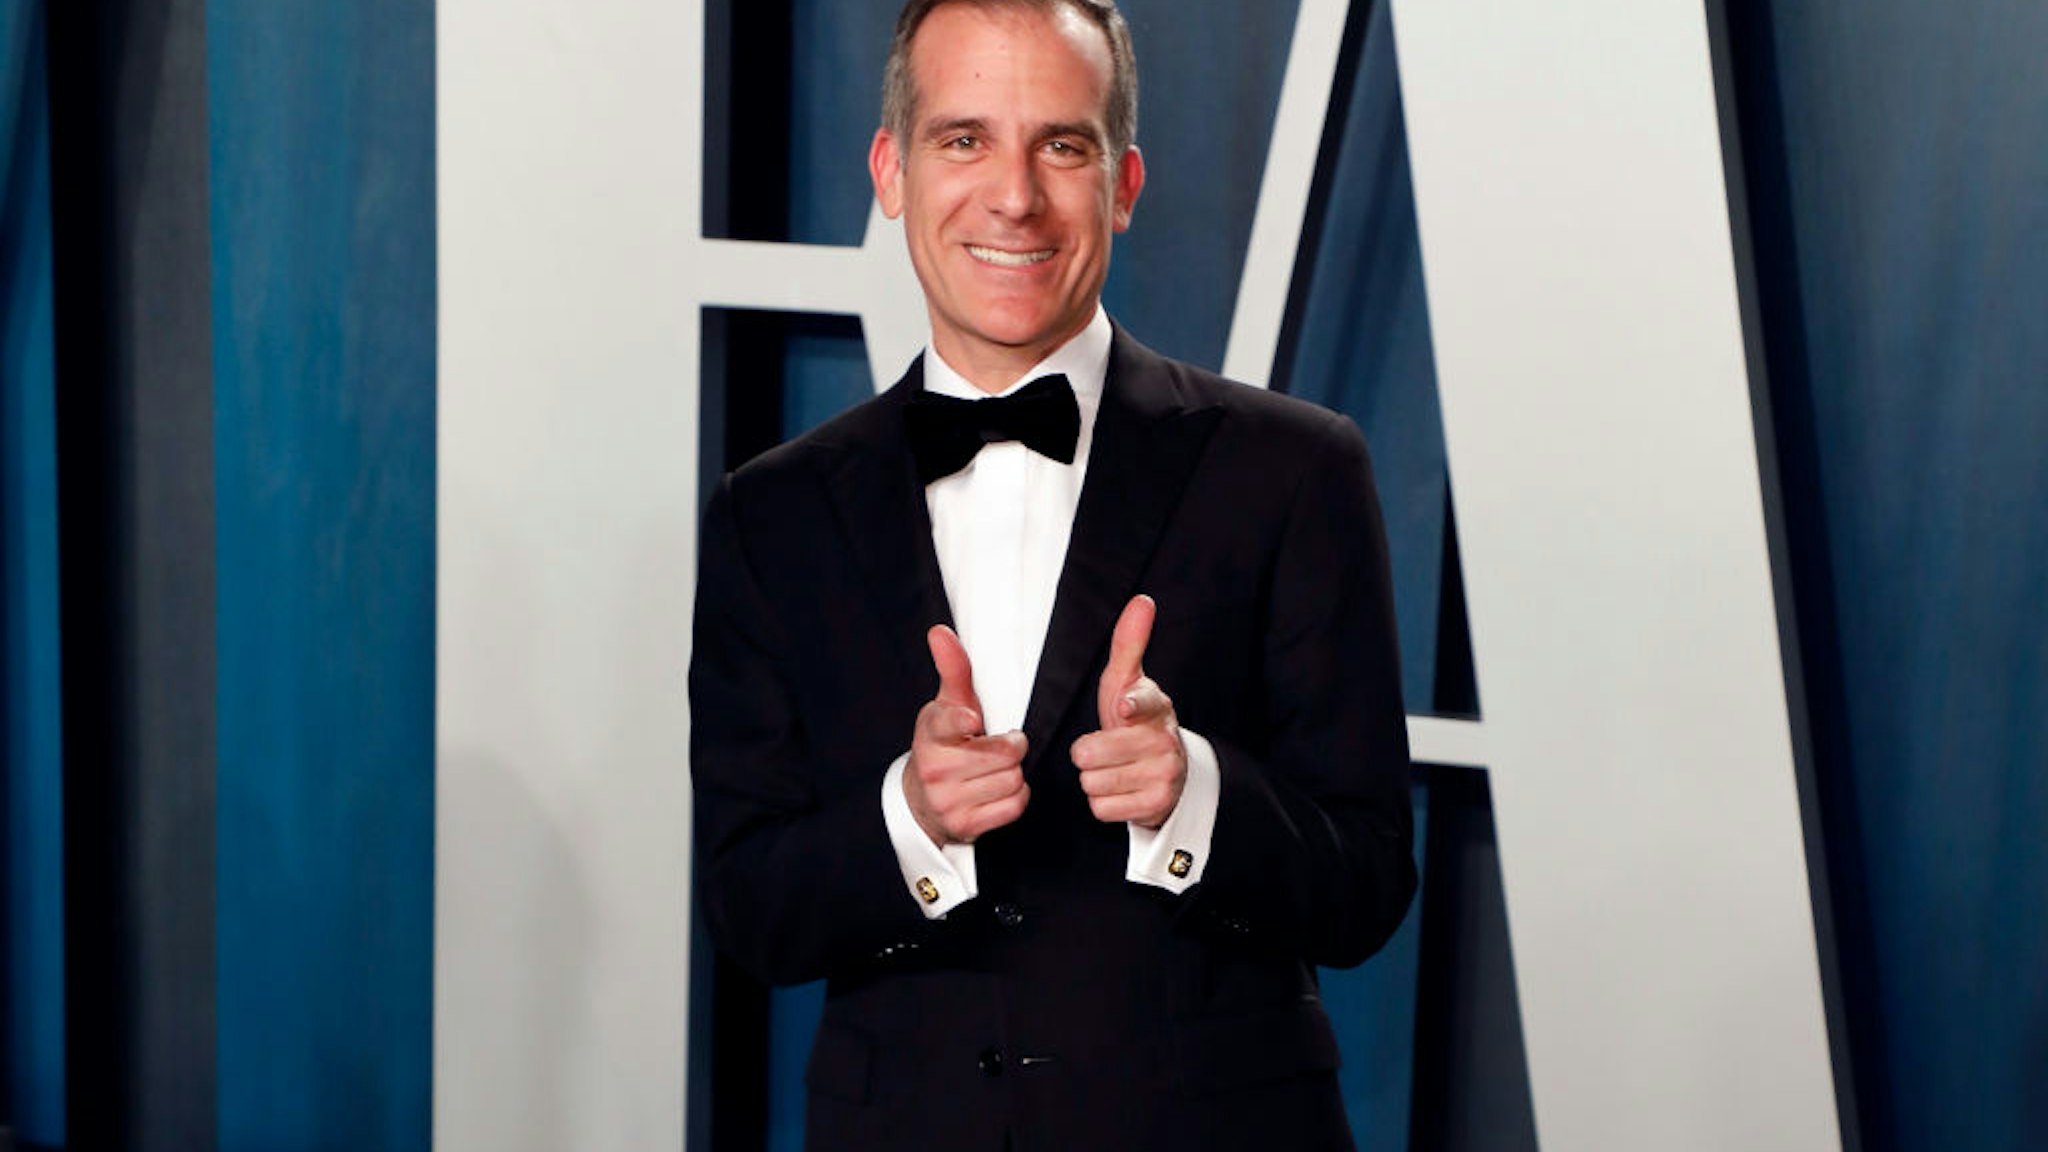 Los Angeles Mayor Eric Garcetti attends the 2020 Vanity Fair Oscar Party at Wallis Annenberg Center for the Performing Arts on February 09, 2020 in Beverly Hills, California.